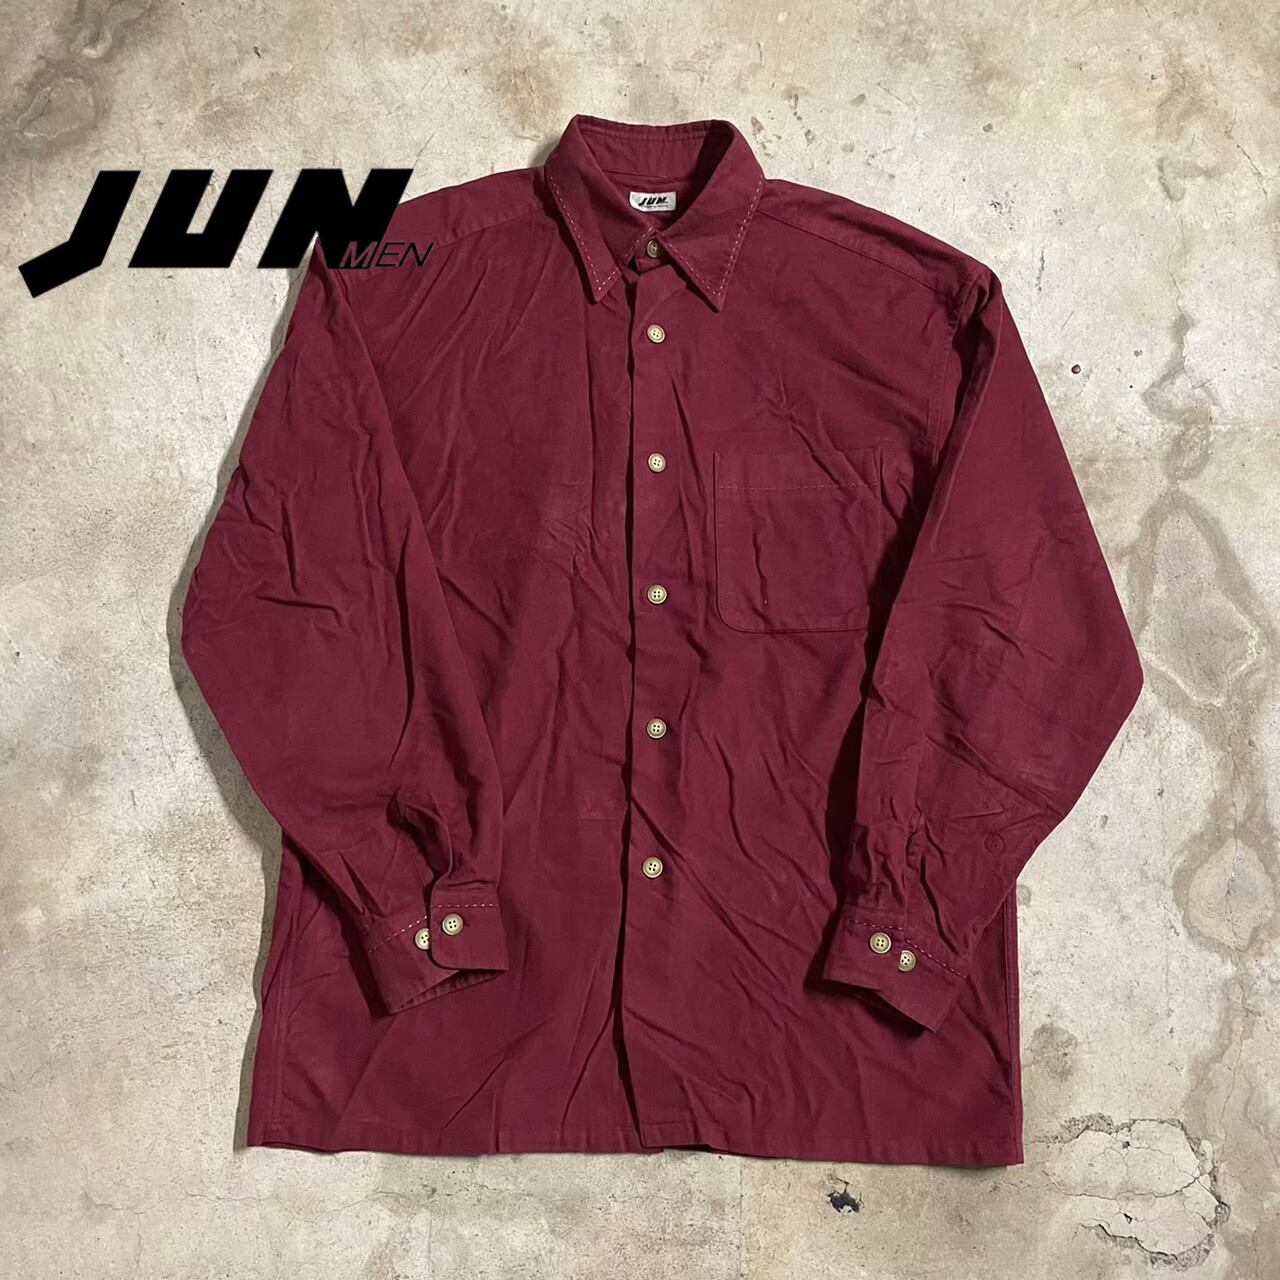 〖JUN MEN〗90’s stitch design winered color retro shirt/ジュンメン 90年代 ステッチ デザイン  ワインレッド カラー レトロ シャツ/lsize/#0312/osaka | 〚EINS_archive〛 powered by BASE